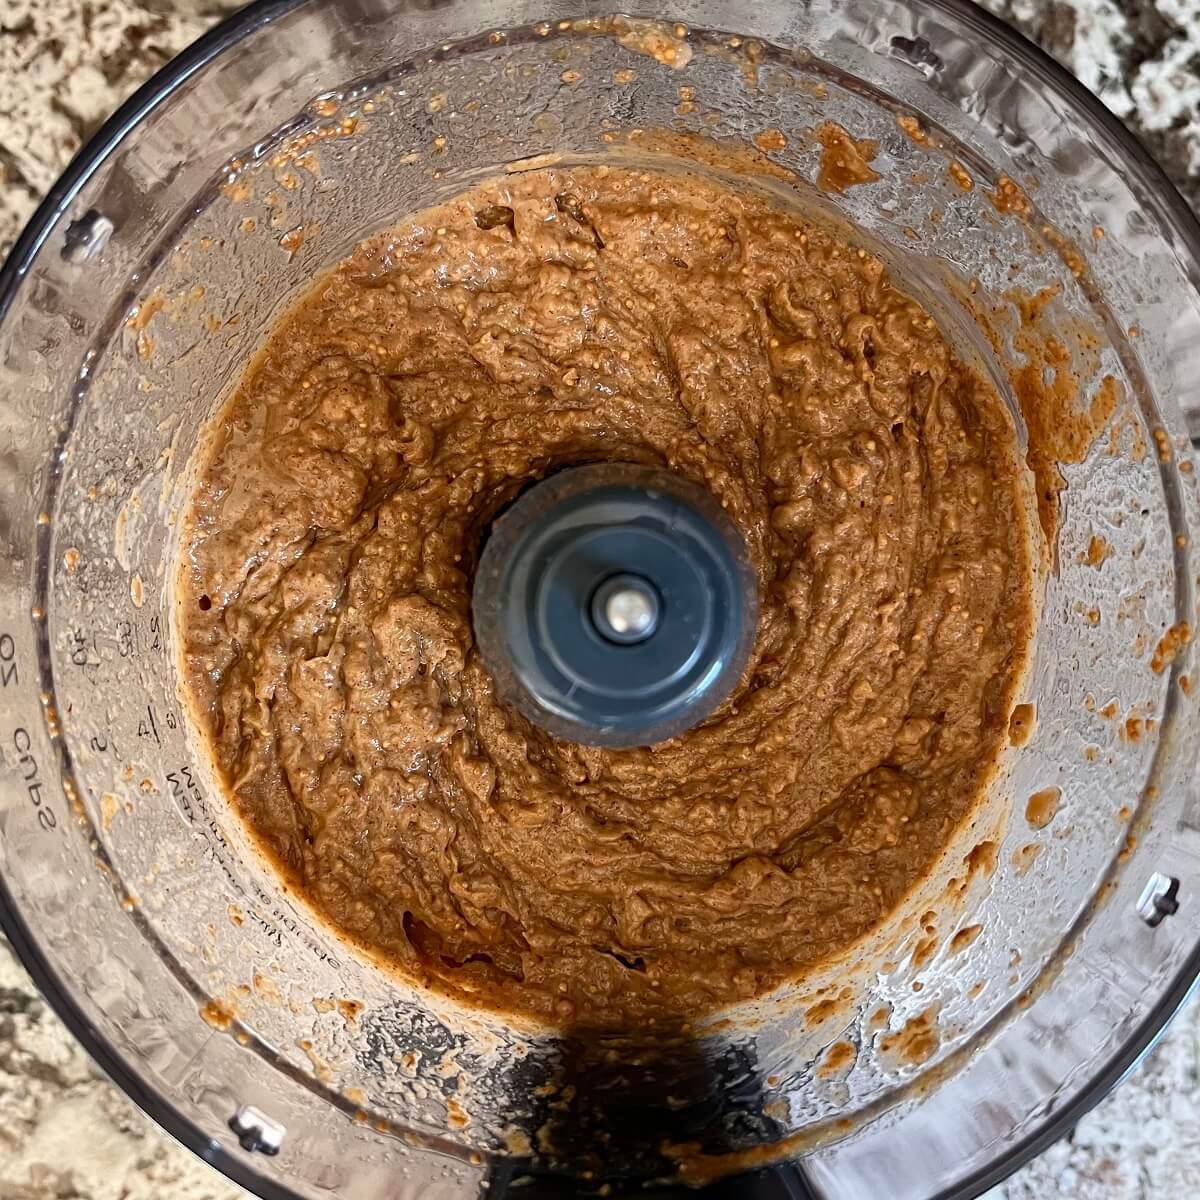 Blended fig mixture in a food processor.